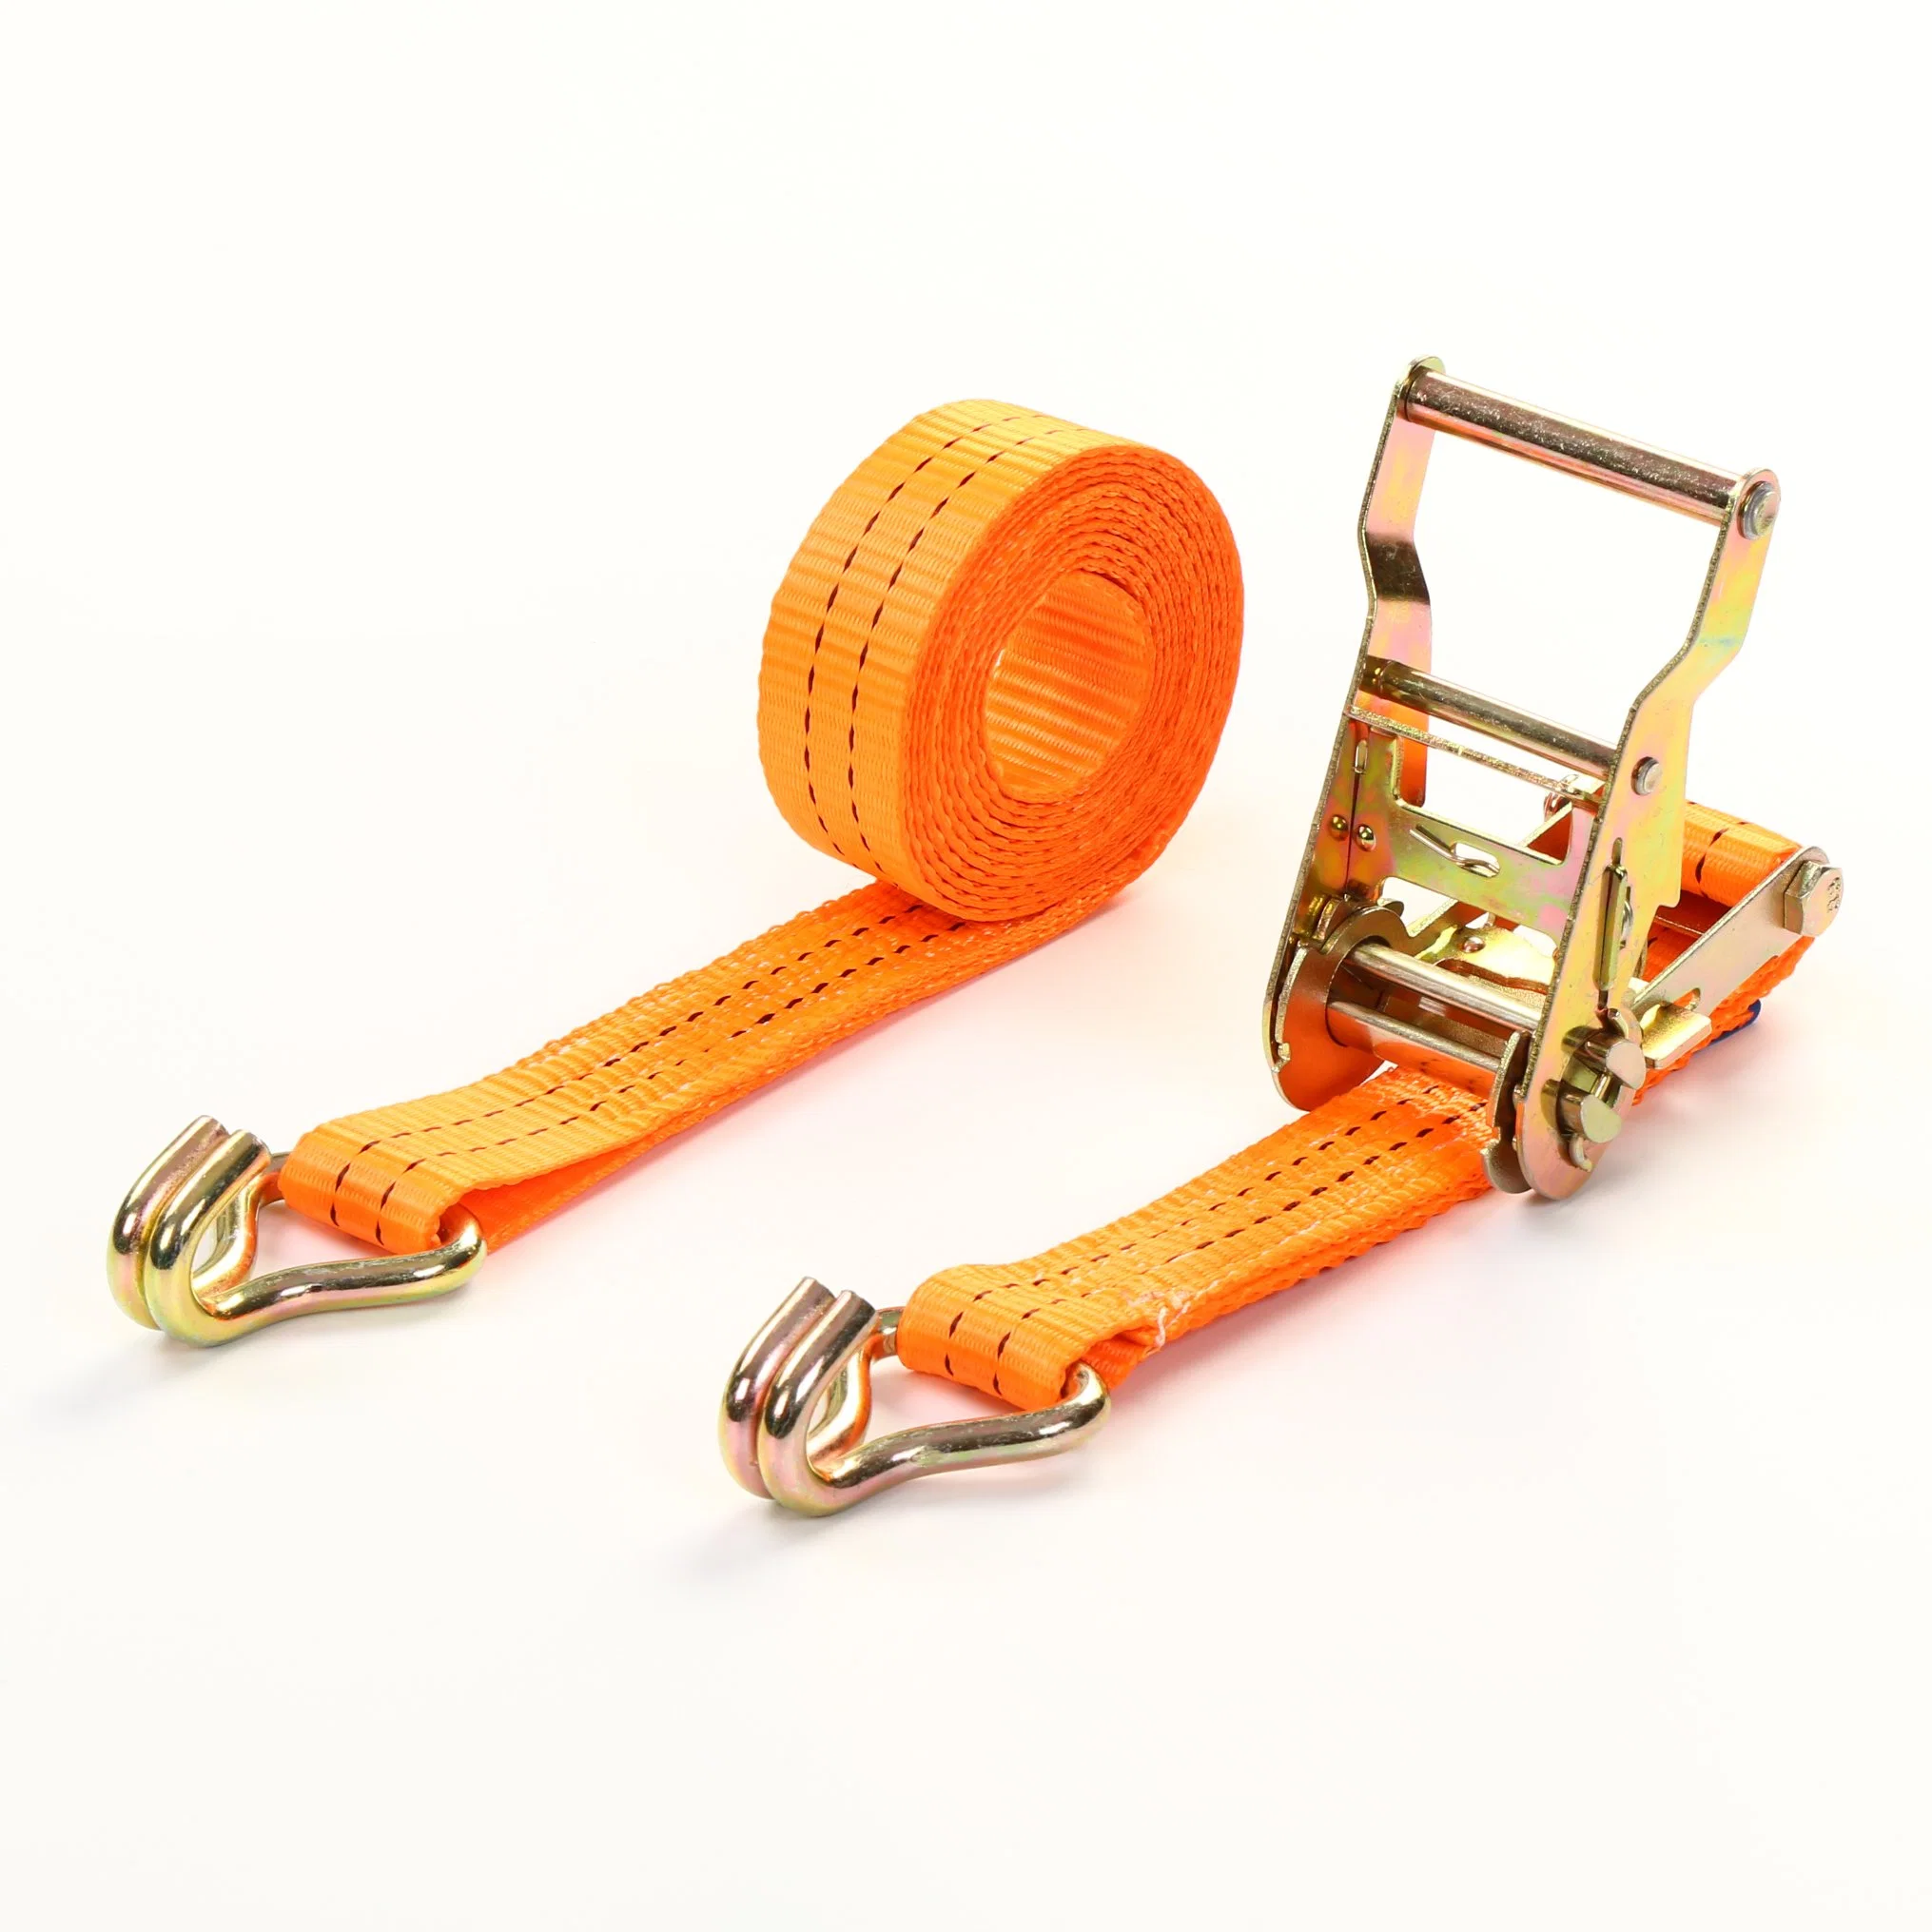 13 FT Portable Heavy Duty Tie Down Cargo Strap Luggage Lashing Strong Ratchet Strap Belt with Metal Buckle